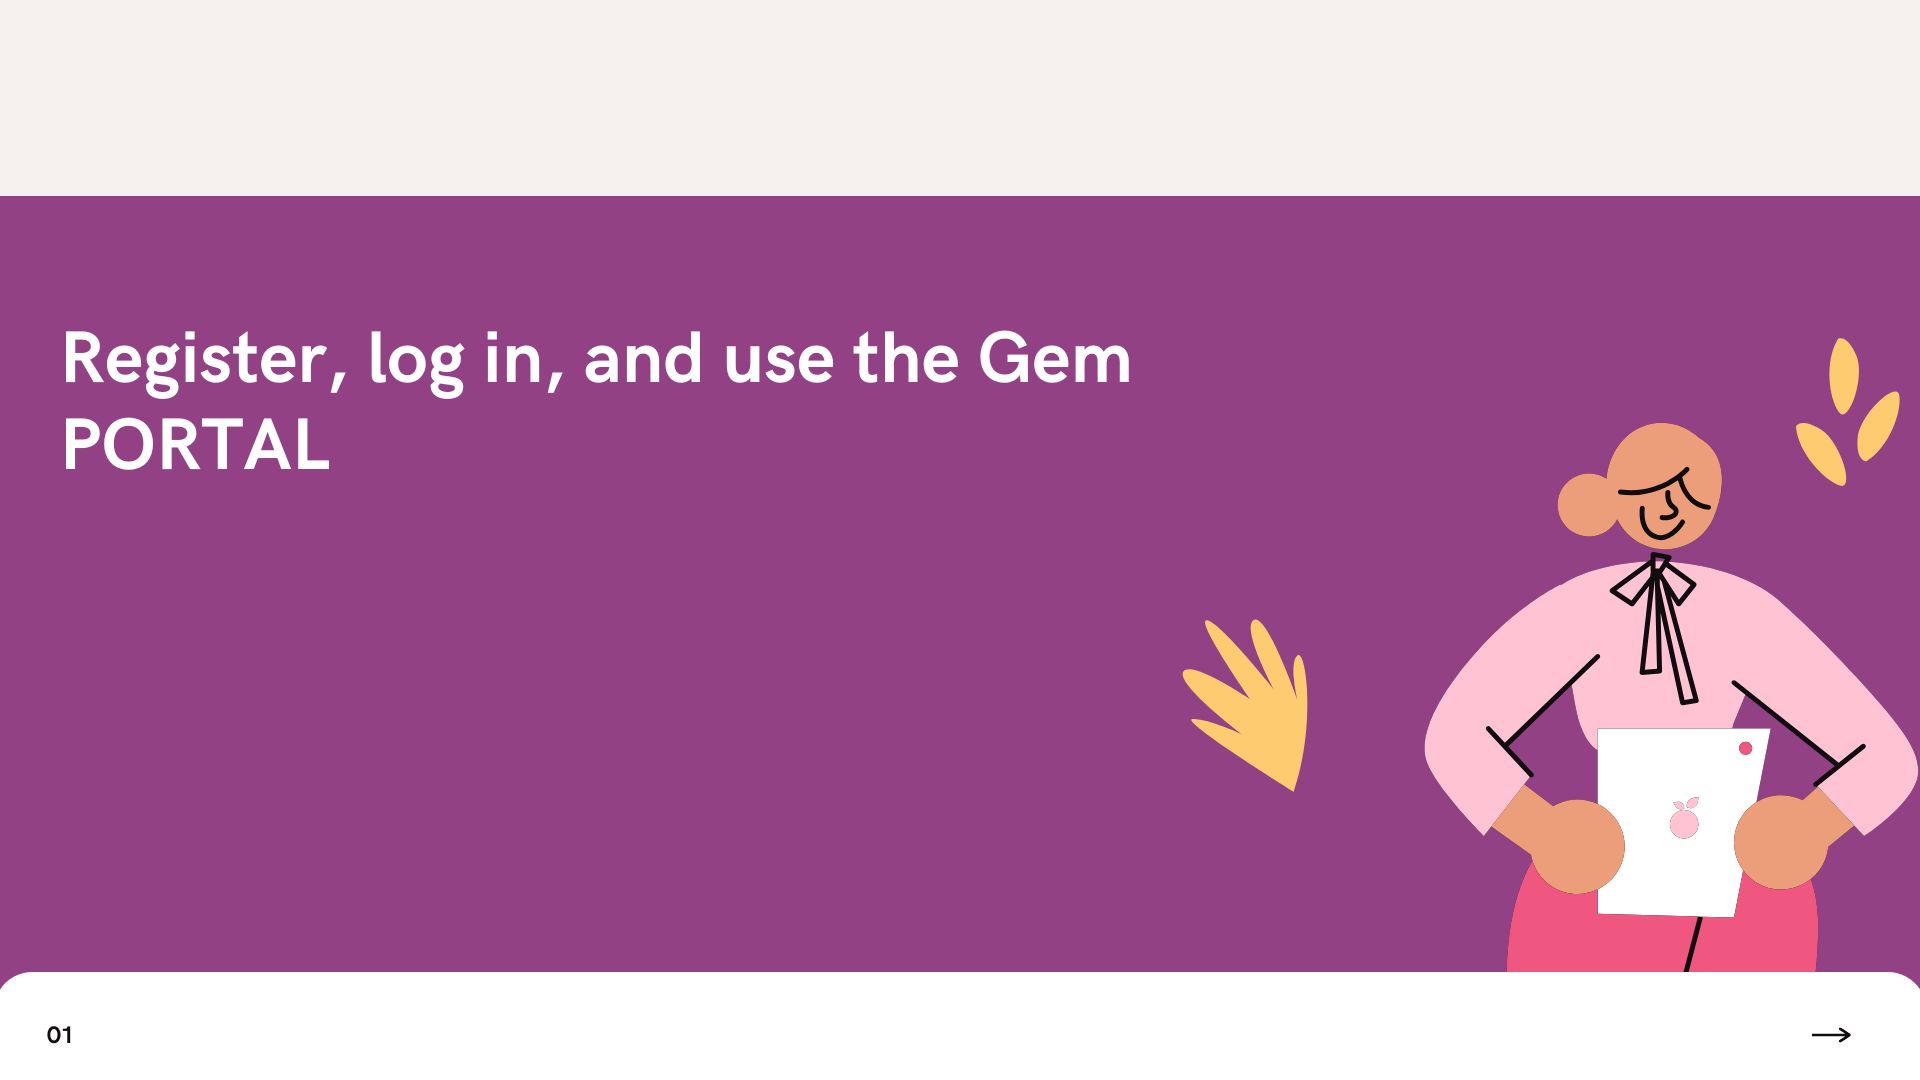 Register, log in, and use the Gem PORTAL